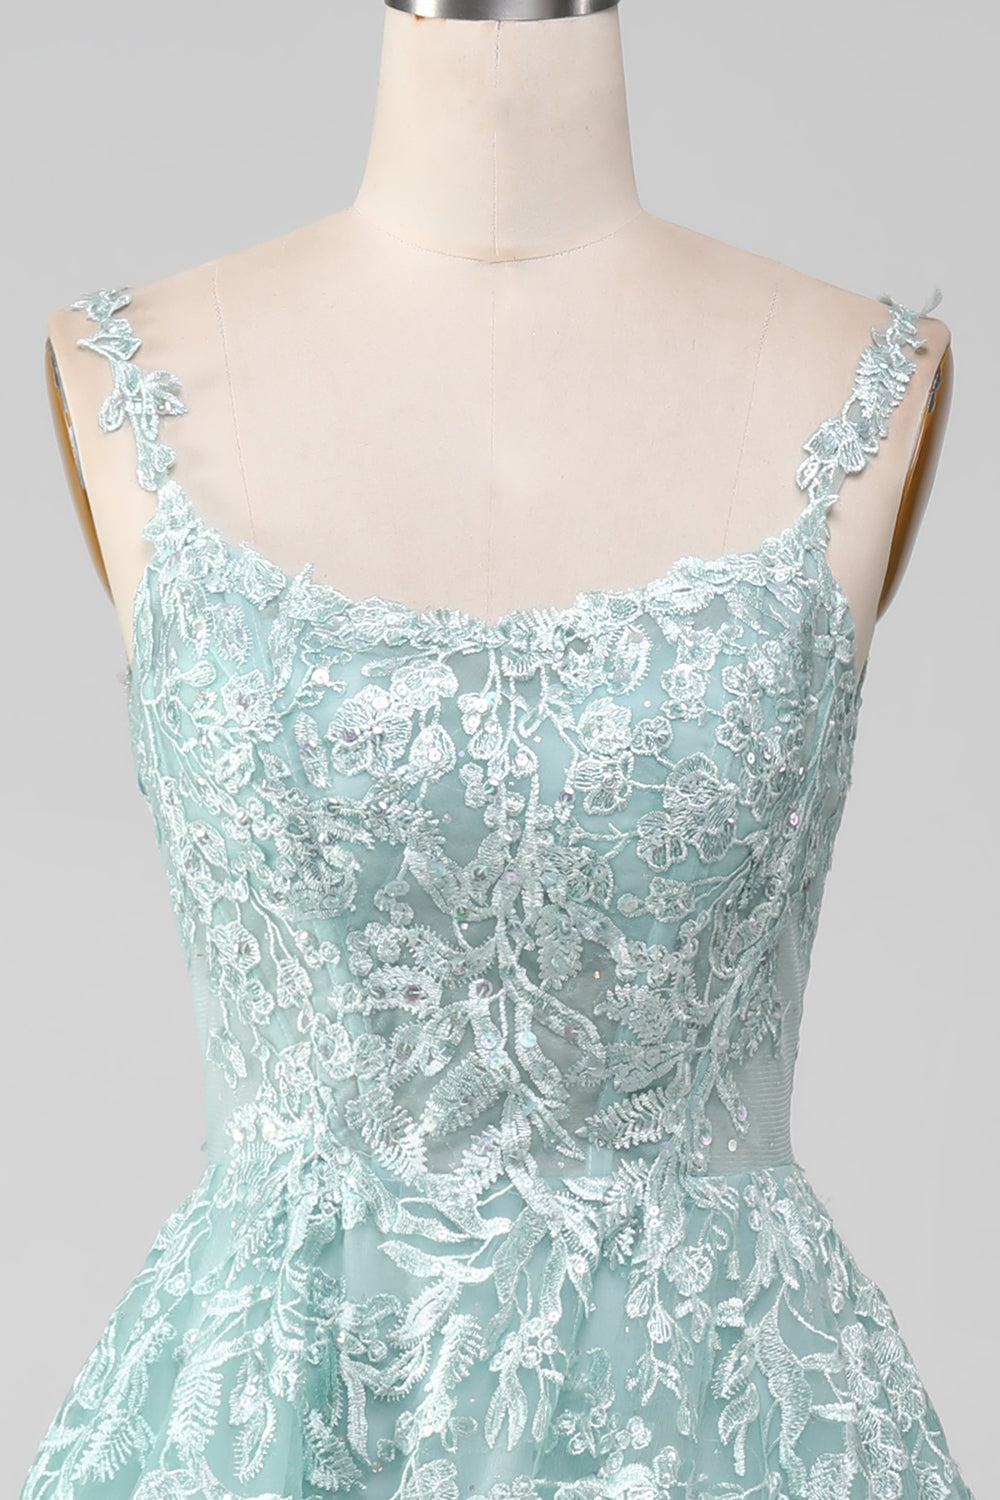 Glitter Mint A-Line Tulle Long Prom Dress with Lace